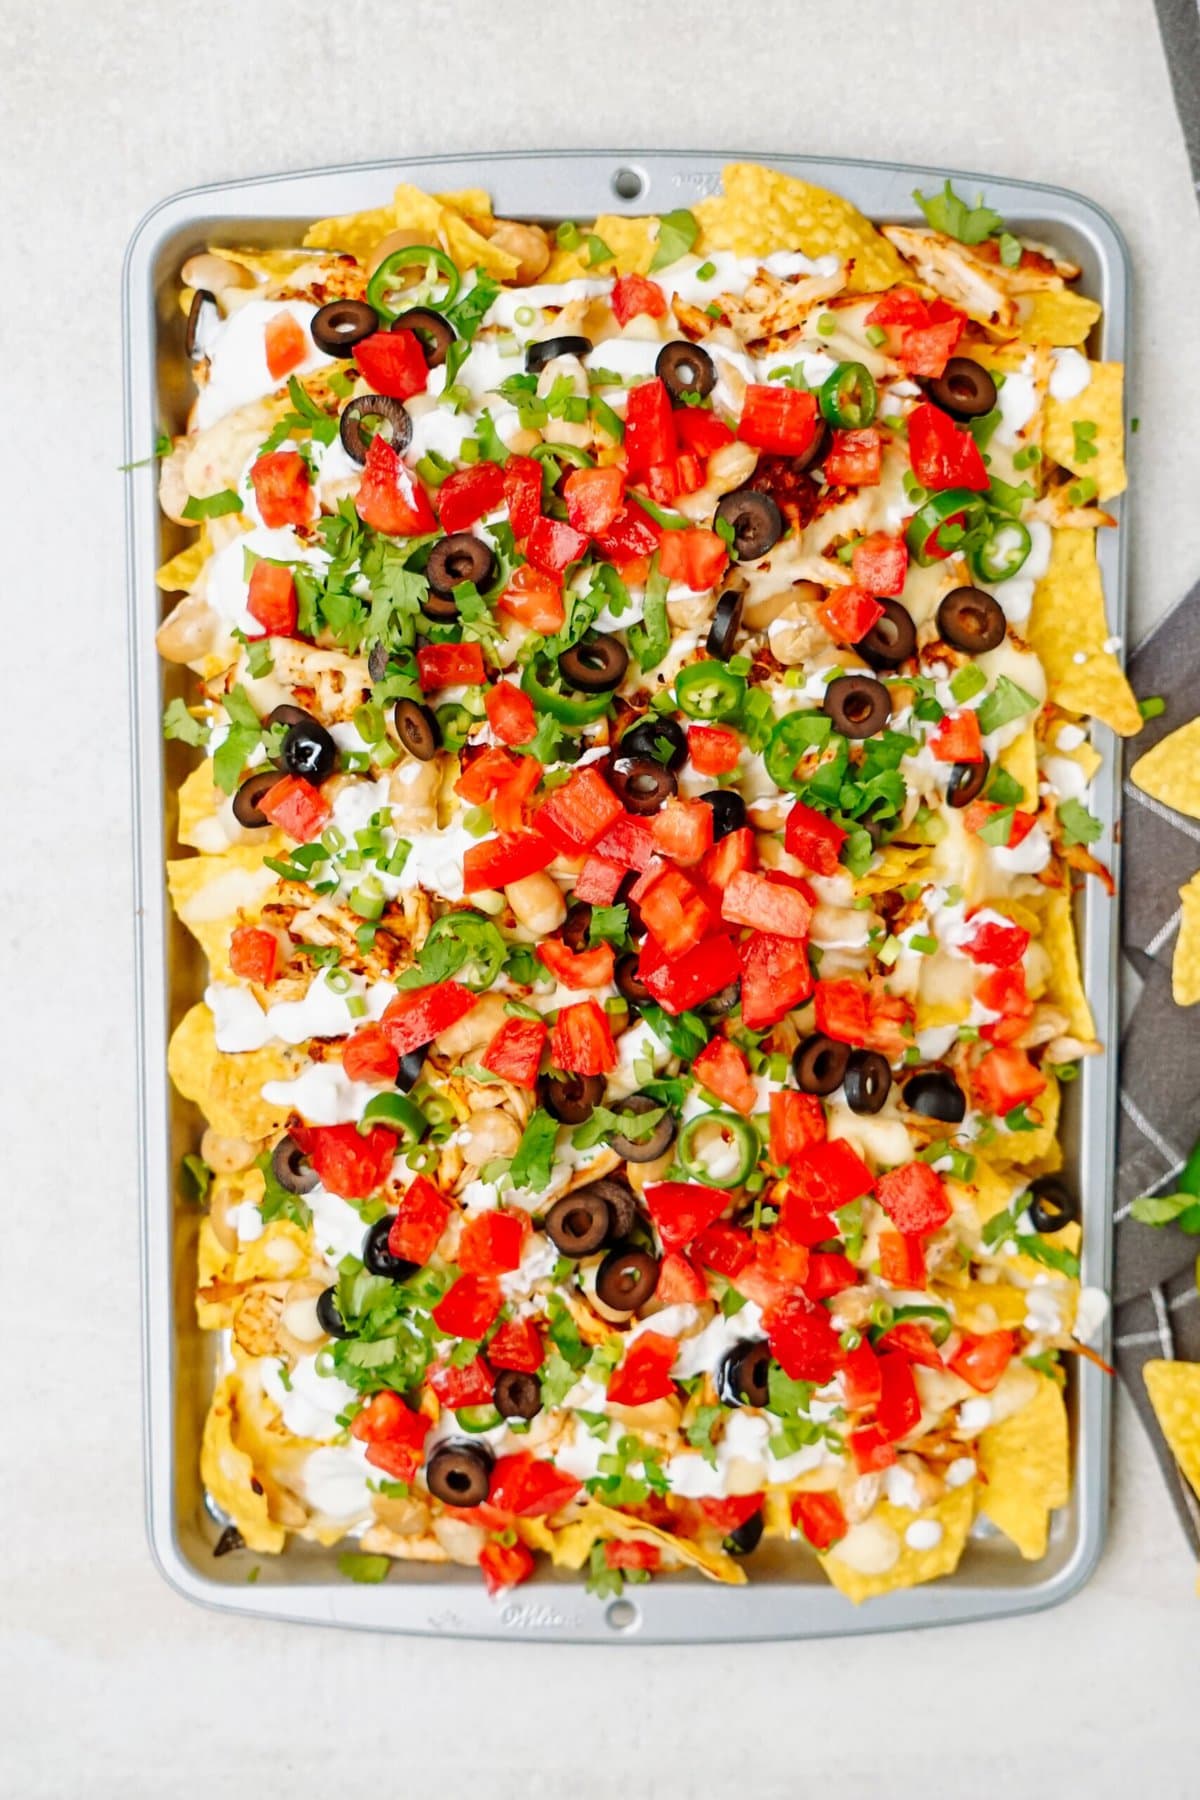 A tray of loaded nachos topped with melted cheese, diced tomatoes, black olives, jalapeño slices, chopped cilantro, and drizzled with sour cream. Corn tortilla chips are visible at the edges of the tray.